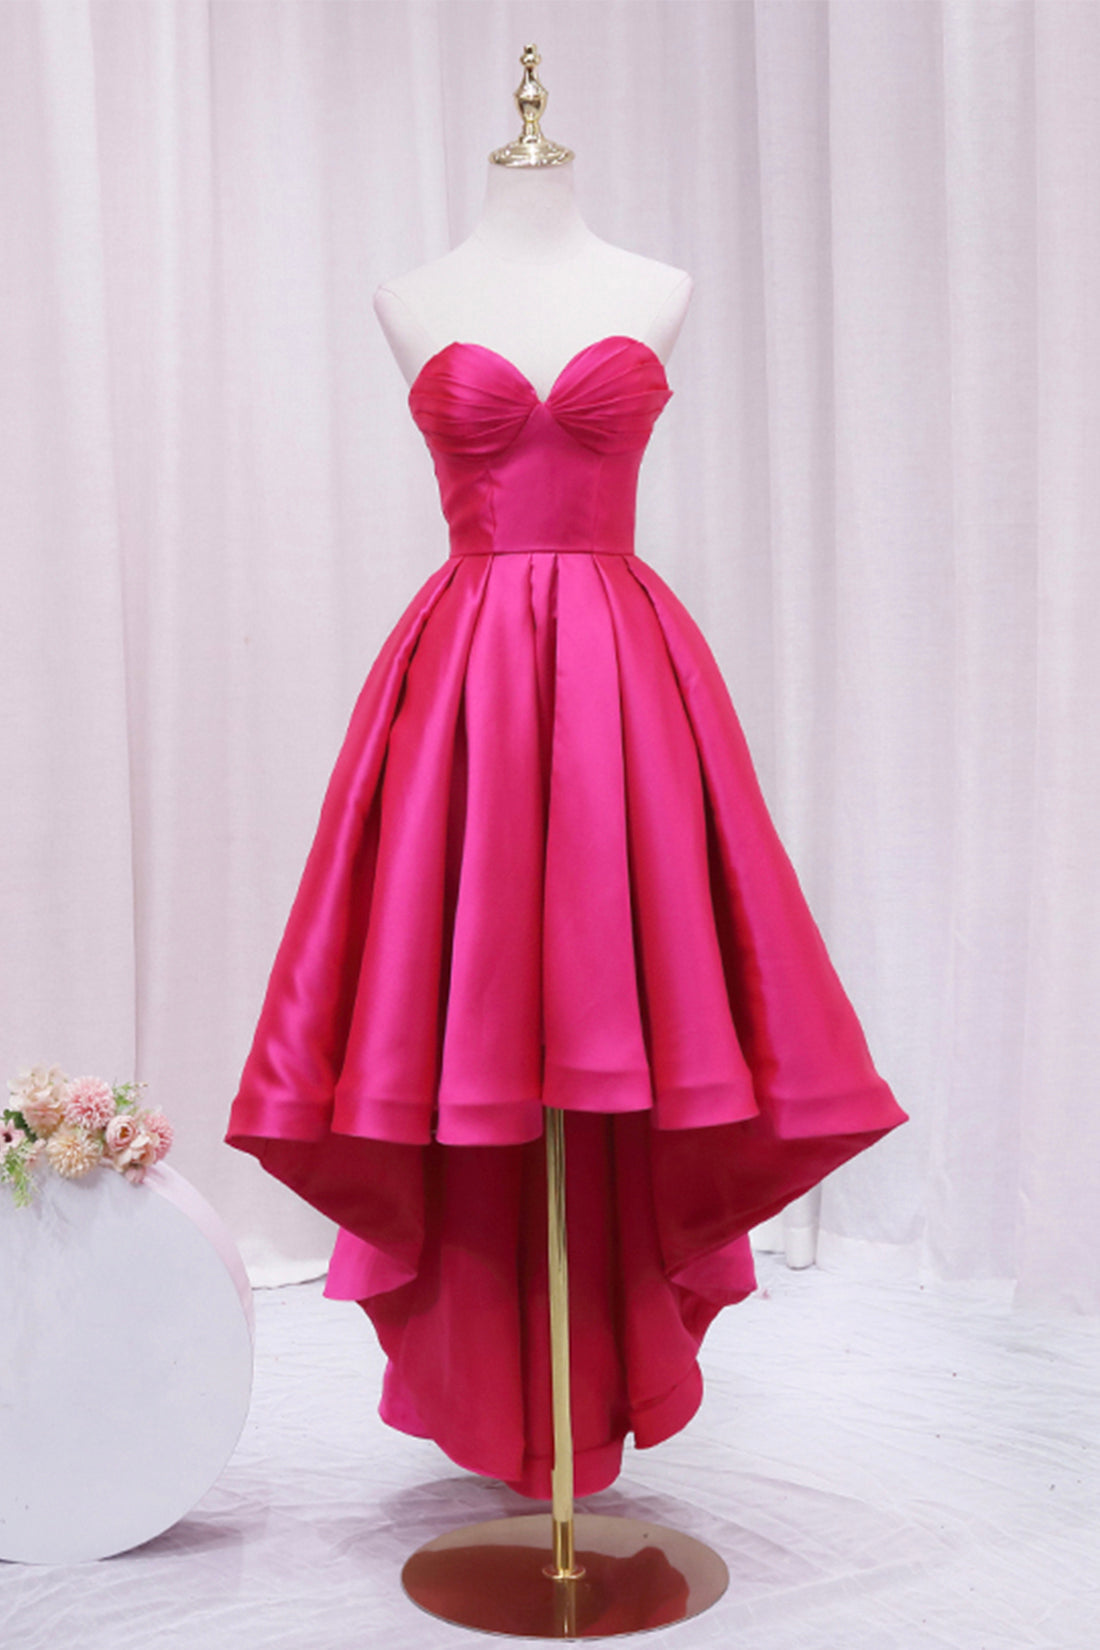 Hot Pink Satin High Low Prom Dress Outfits For Girls, Cute Sweetheart Neck Evening Party Dress